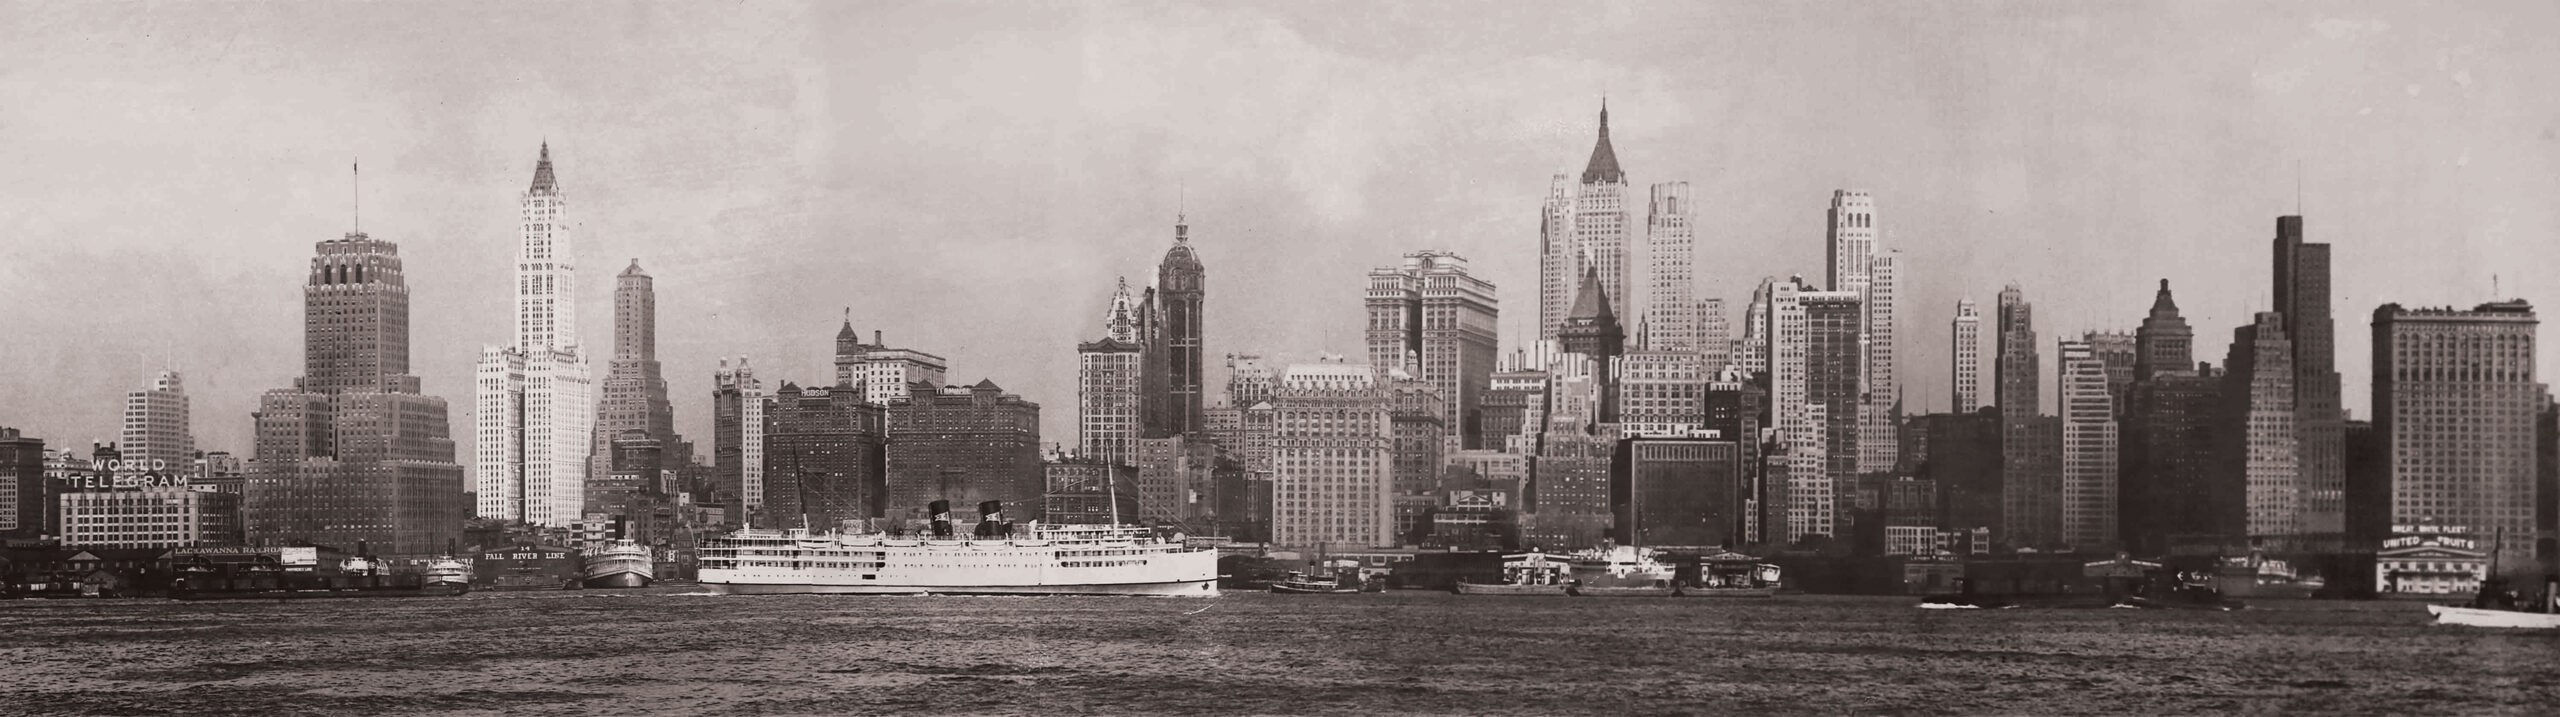 Top: Lower Manhattan from Jersey City, 1932. Irving Underhill. Courtesy of the Woolworth Building.
Below: Lower Manhattan from Brooklyn, ,1931. Iring Underhill, Library of Congress.